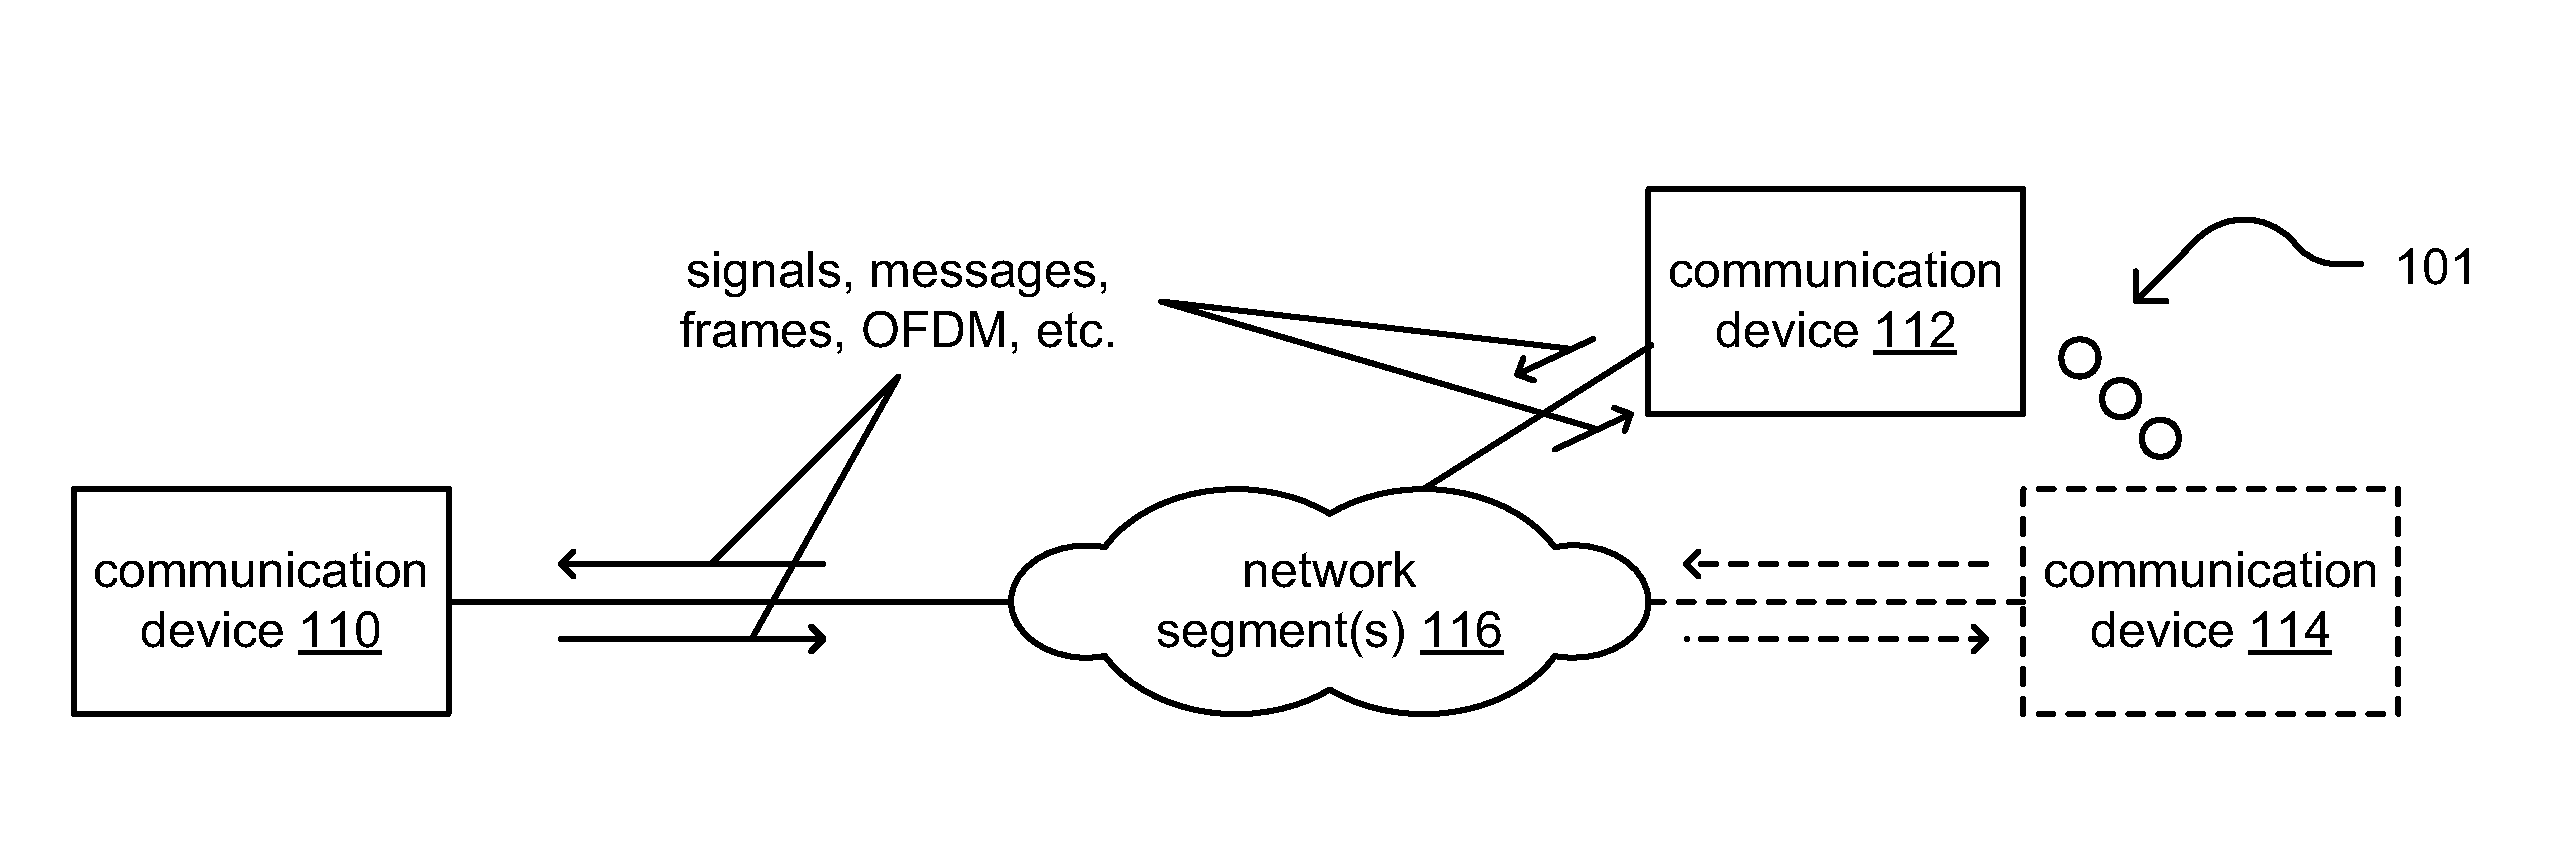 Inband spurious detection and processing within communication systems